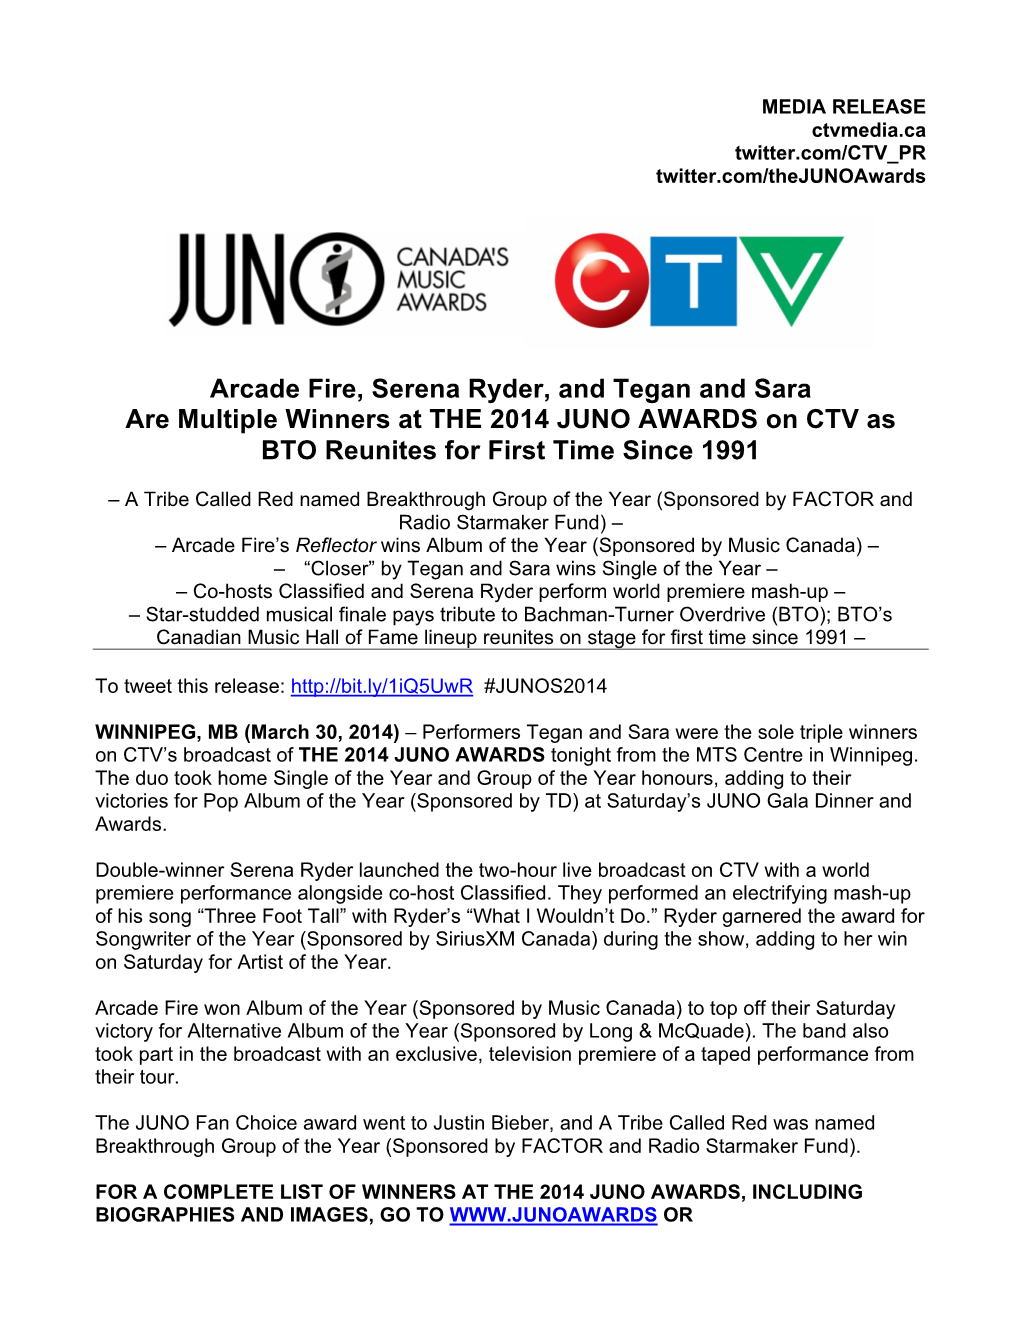 Arcade Fire, Serena Ryder, and Tegan and Sara Are Multiple Winners at the 2014 JUNO AWARDS on CTV As BTO Reunites for First Time Since 1991